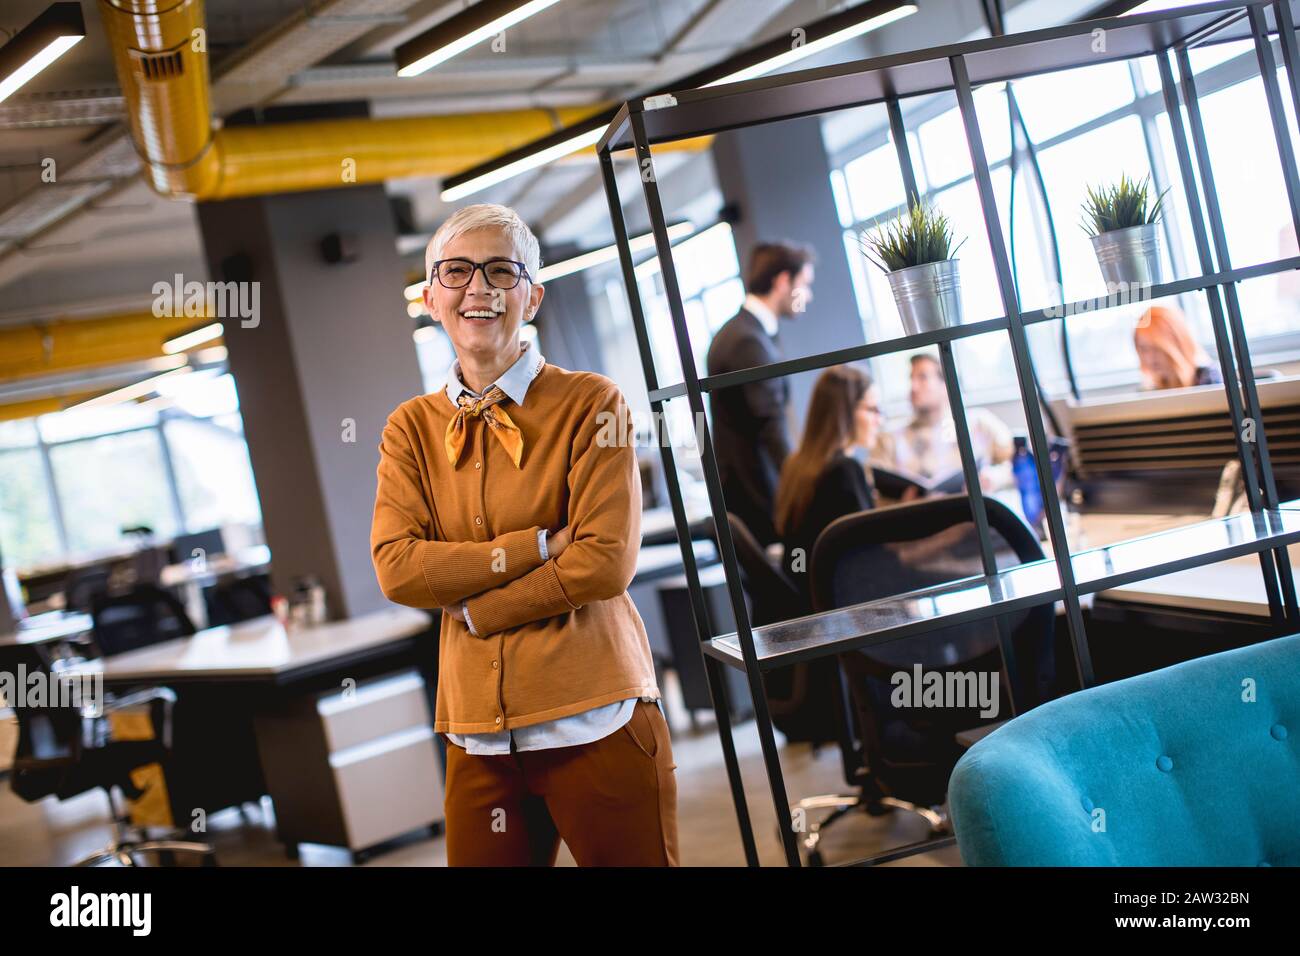 Portrait of smiling senior woman standing outside meeting room with team discussing work in background Stock Photo